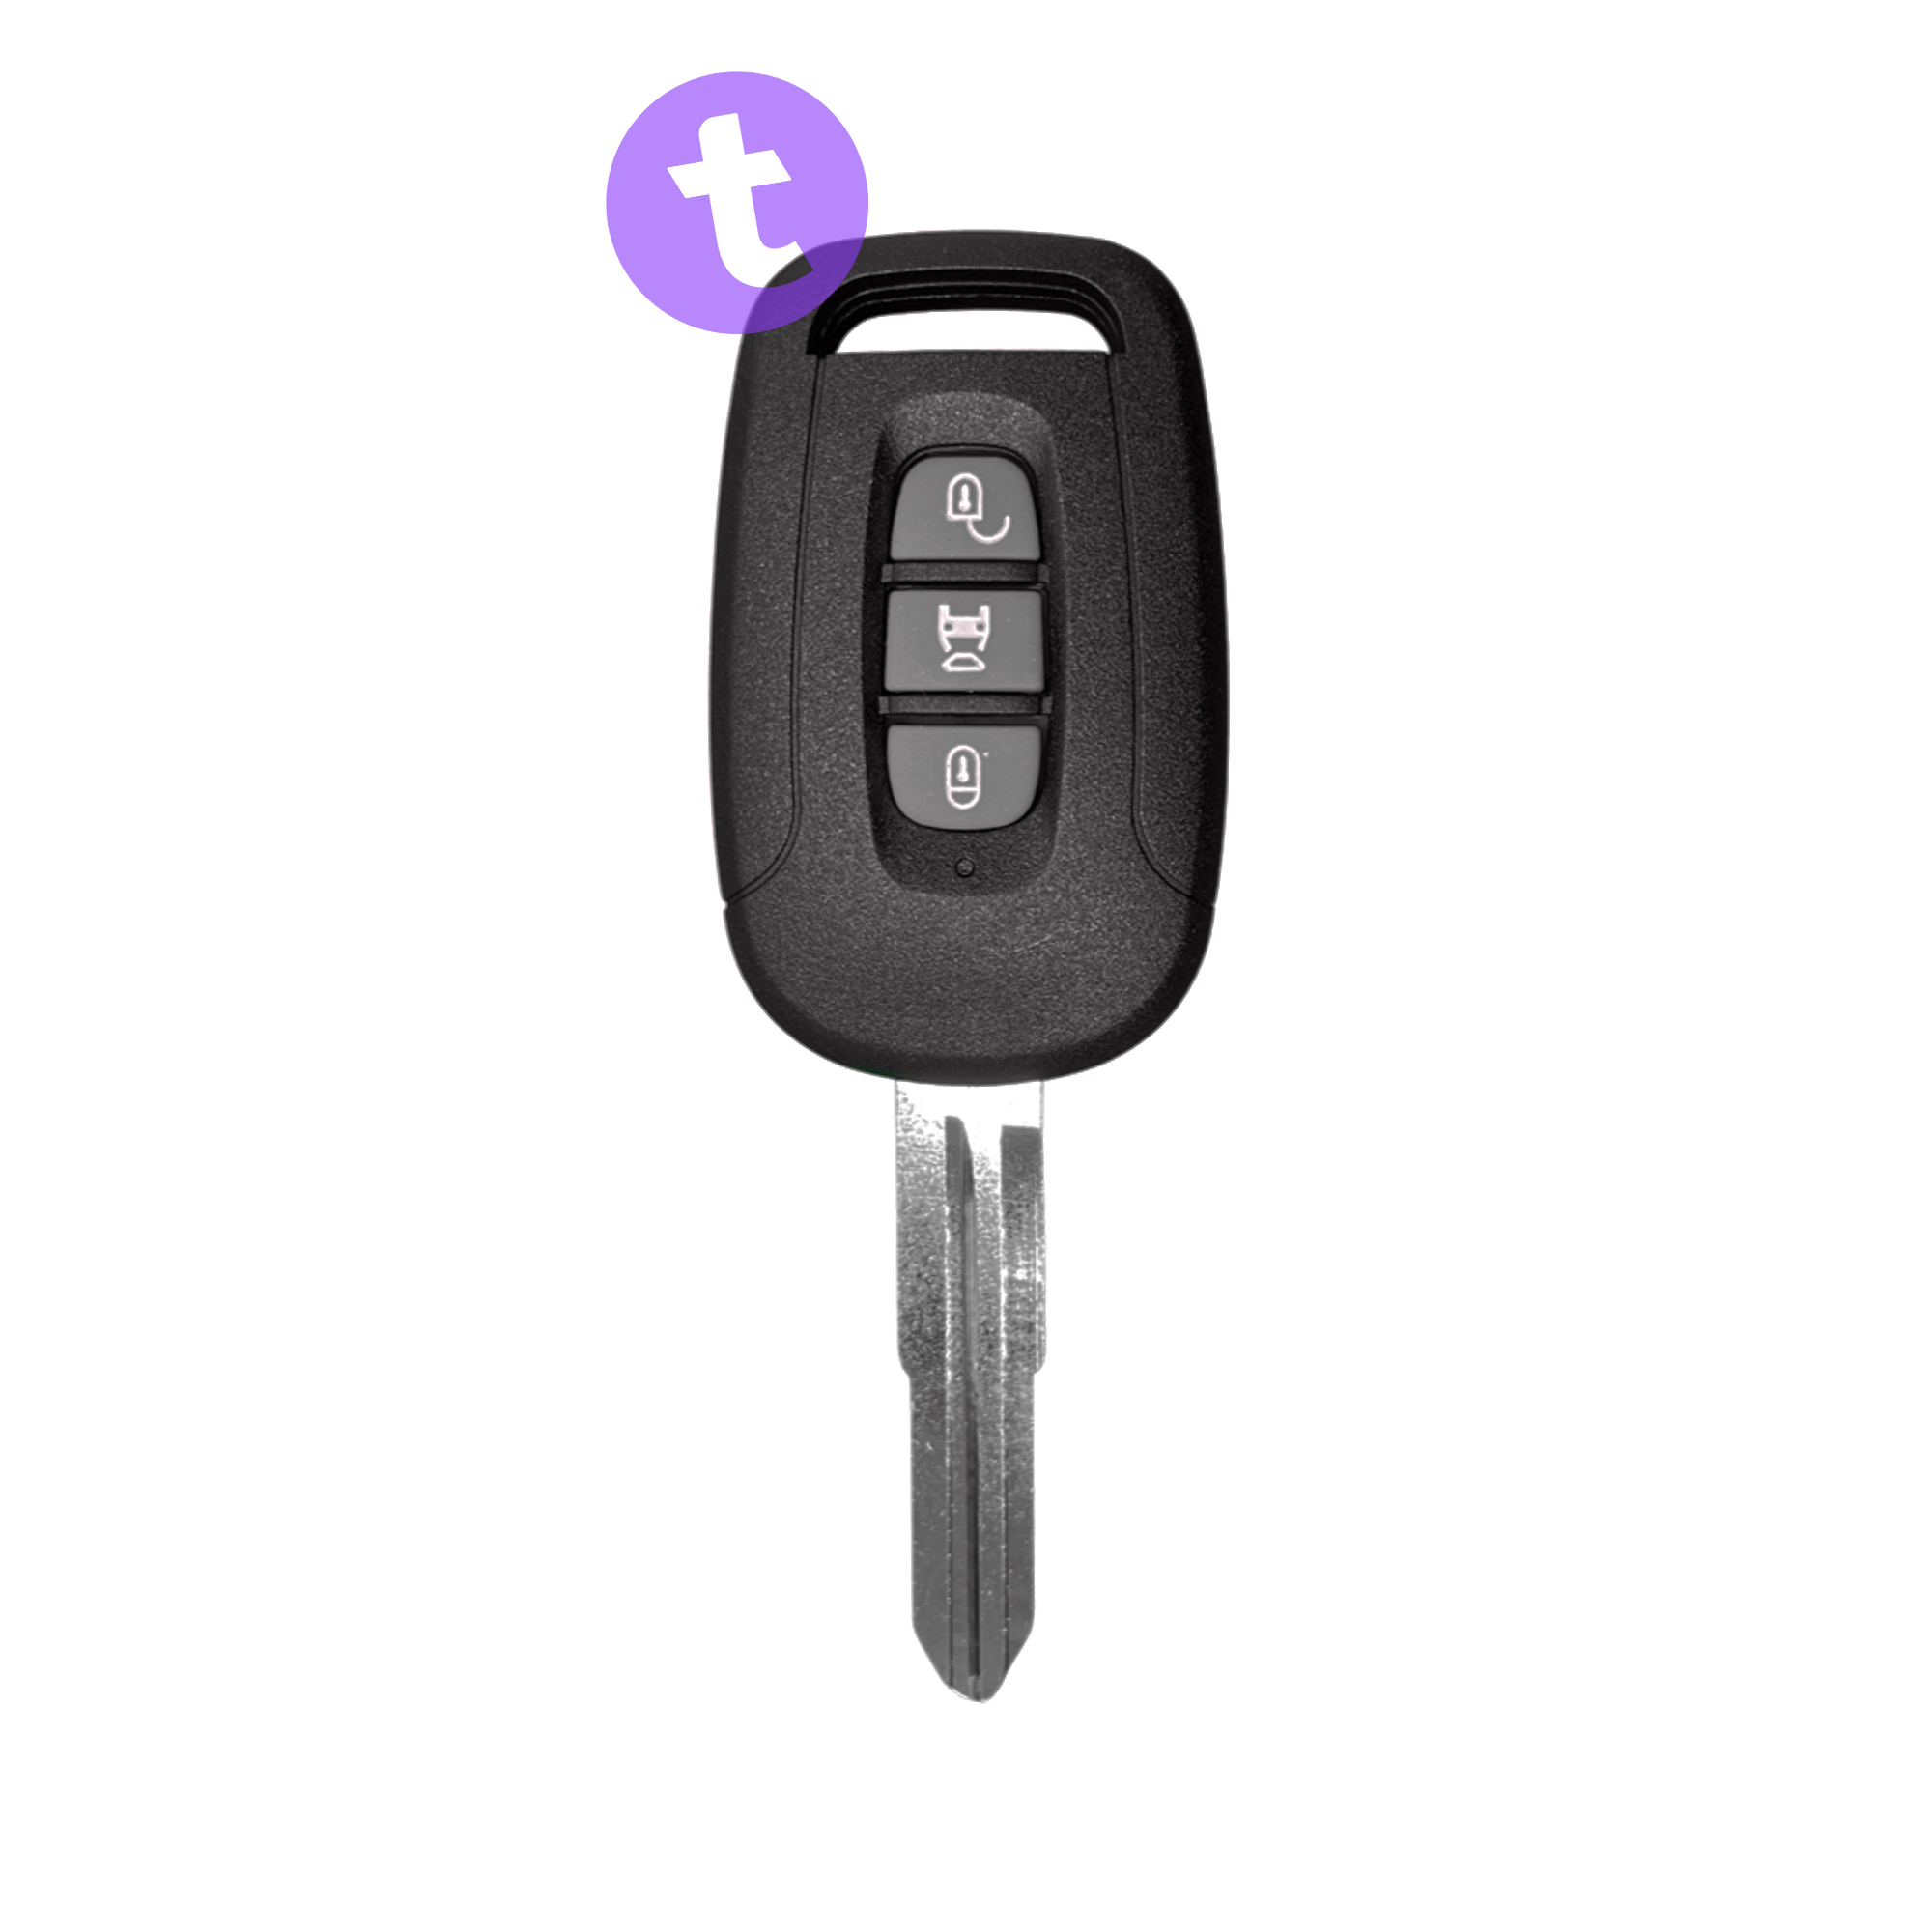 Remote key for Holden Captiva (2006 - 2015) (3 Button)